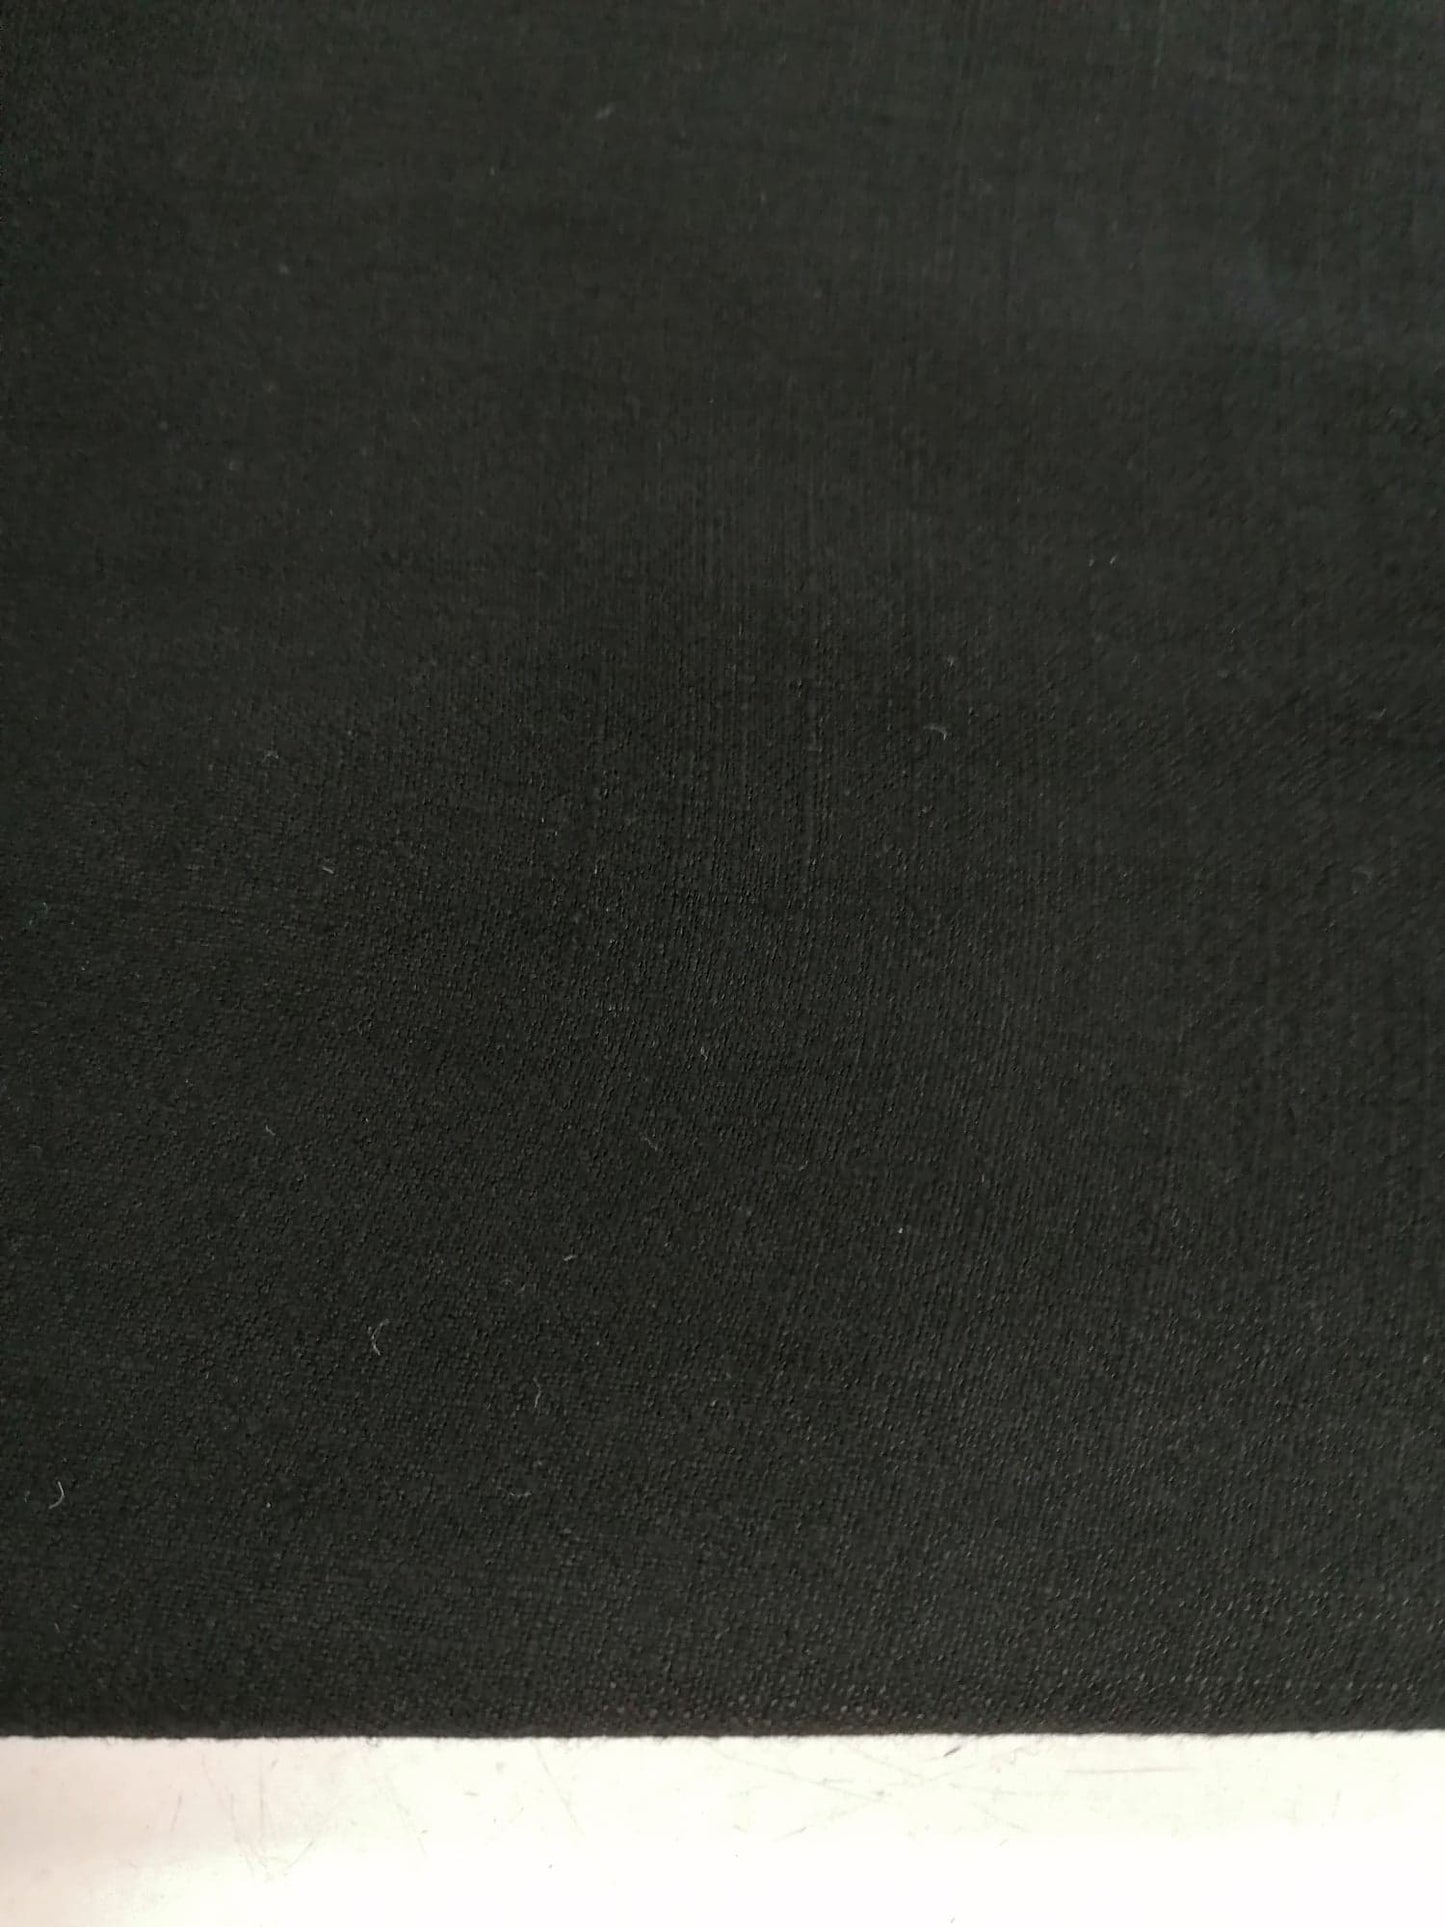 Cotton Linen - Black - 51" Wide - Sold By the Metre